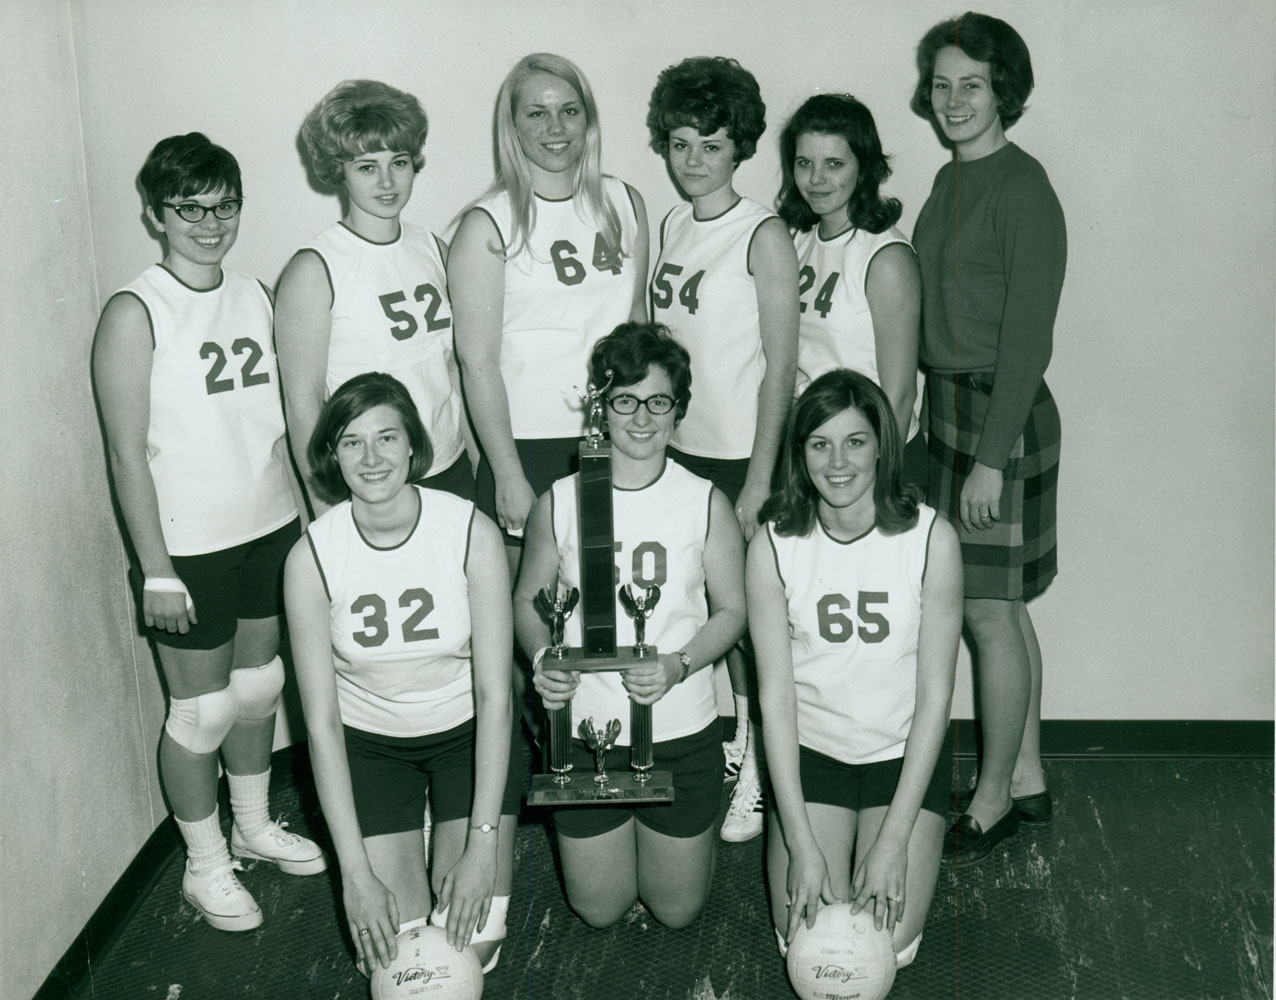 A black and white group portrait of women wearing sports jerseys